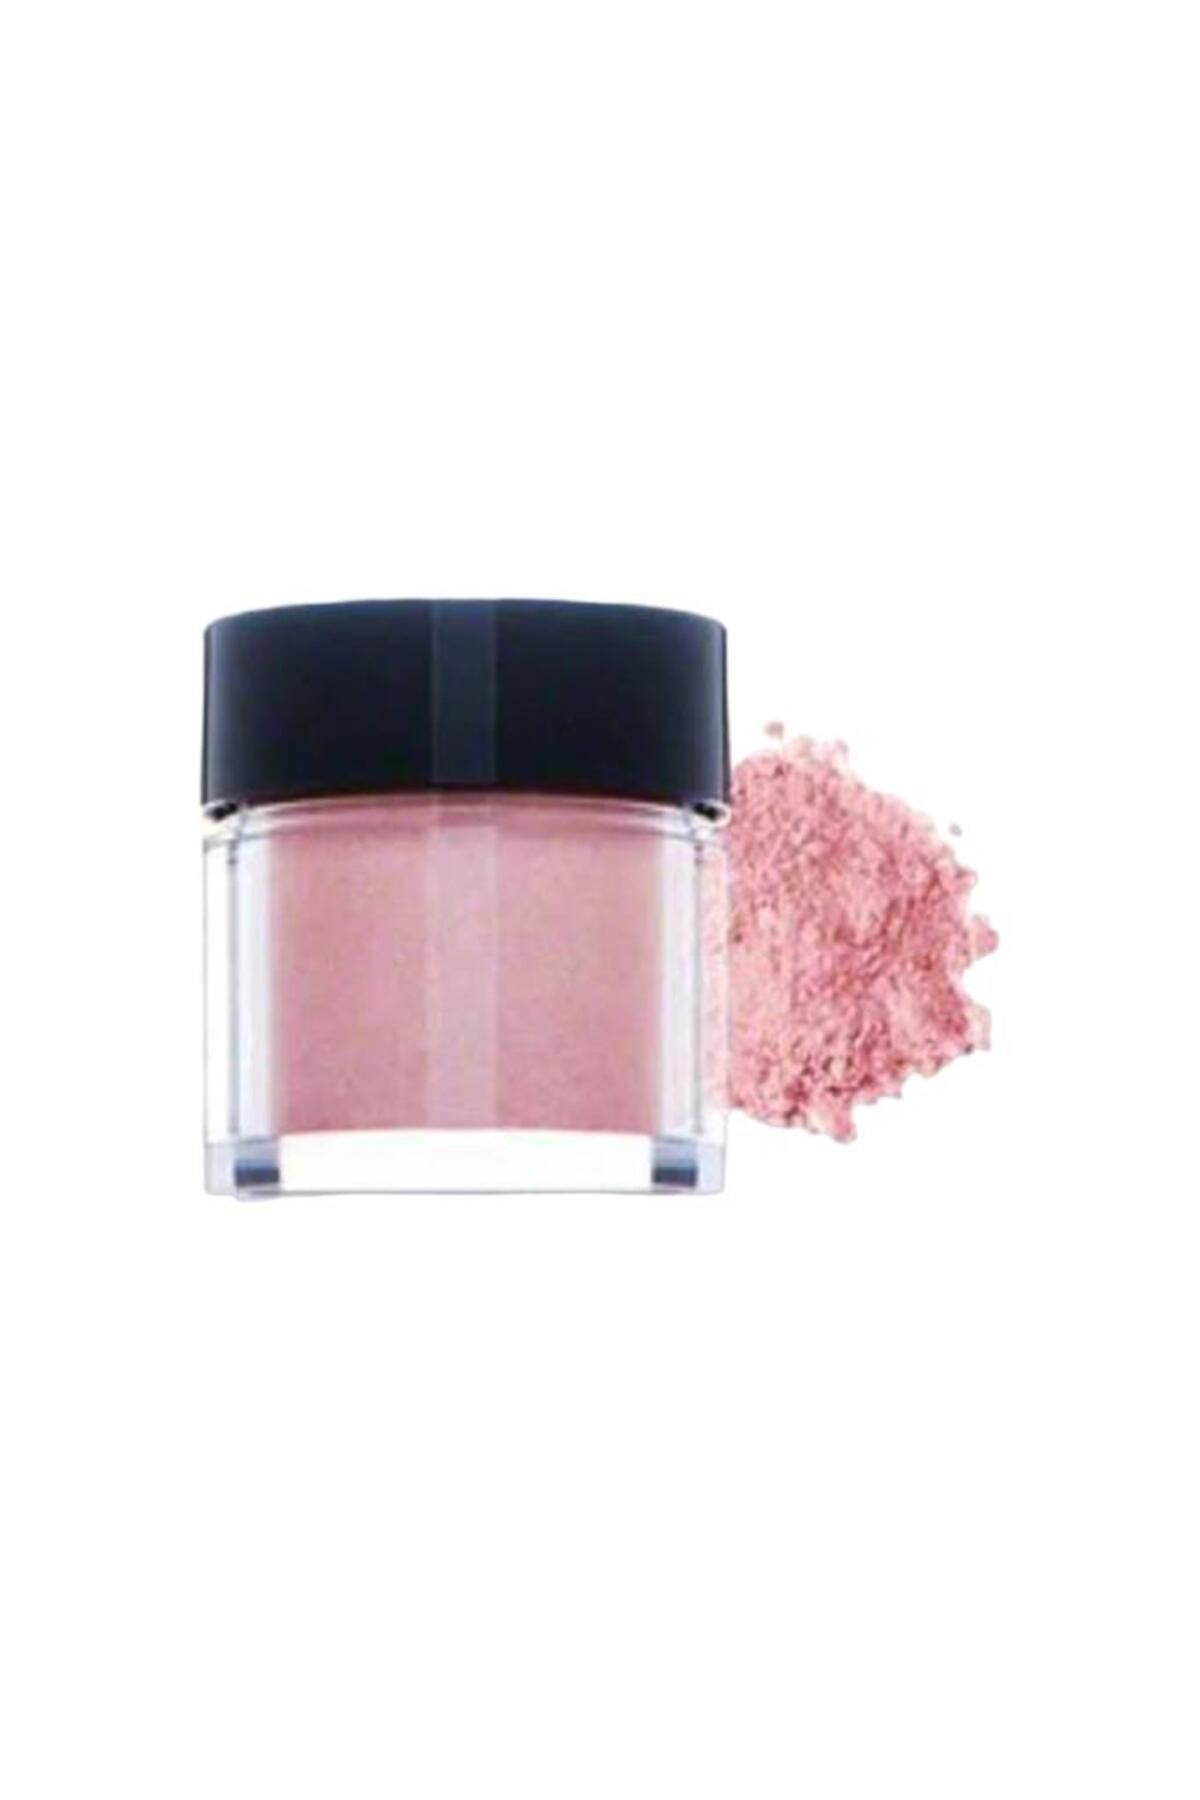 Youngblood Youngblood Crushed Mineral Eyeshadow 2 gr Toz Mineral Far ( Kasbah )